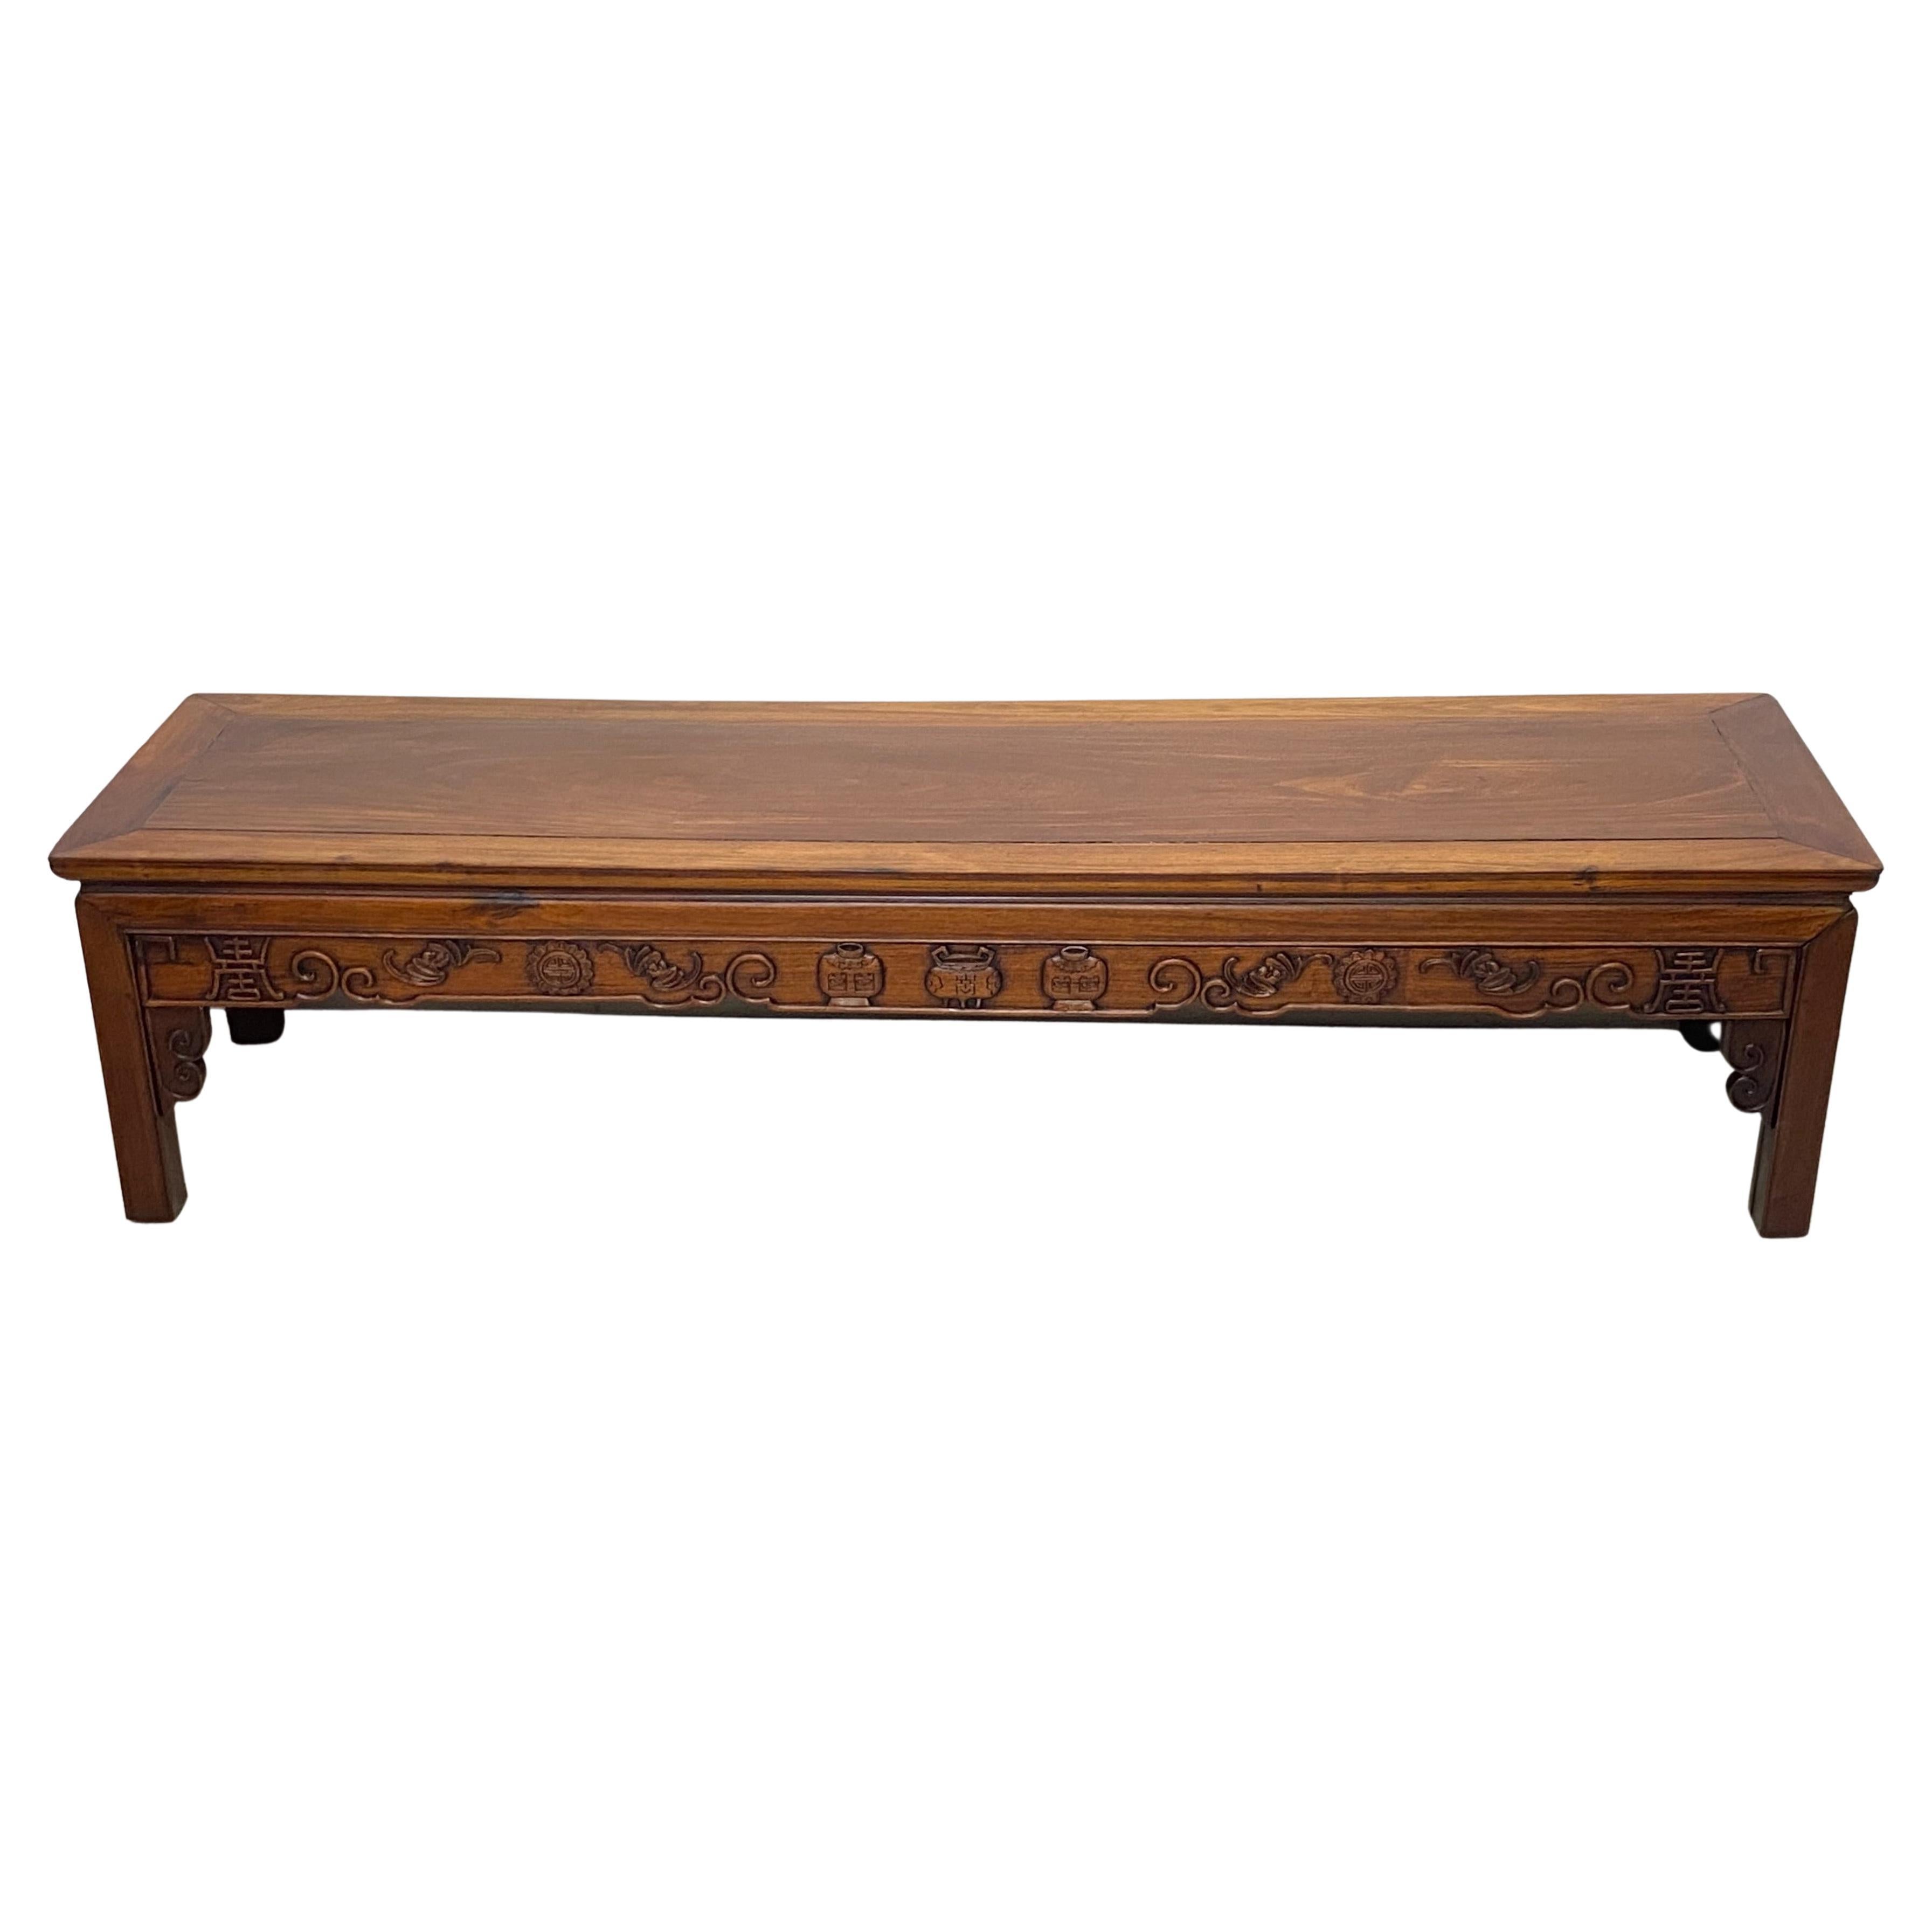 Chinese Rosewood Long Low Table or Bench, Late 19th to Early 20th Century